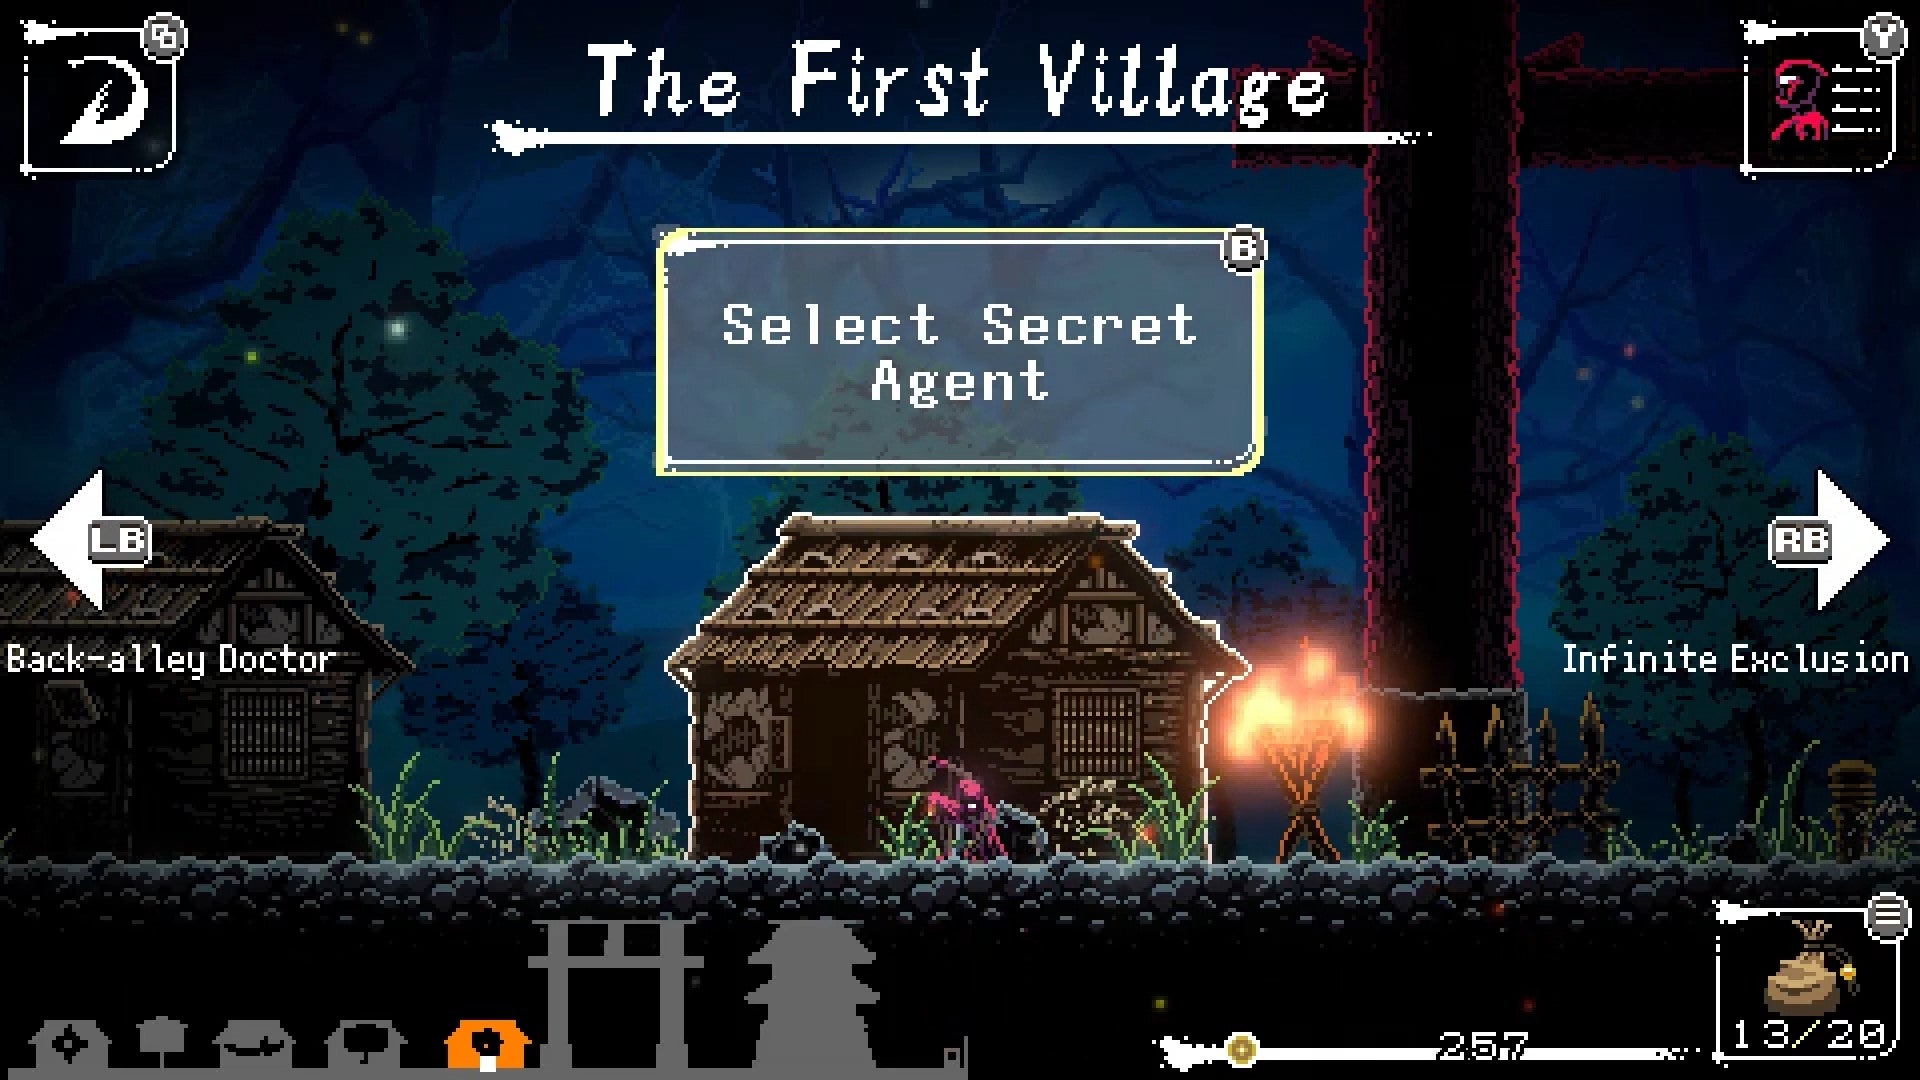 The First Village in Ninja or Die, where players can select a secret agent